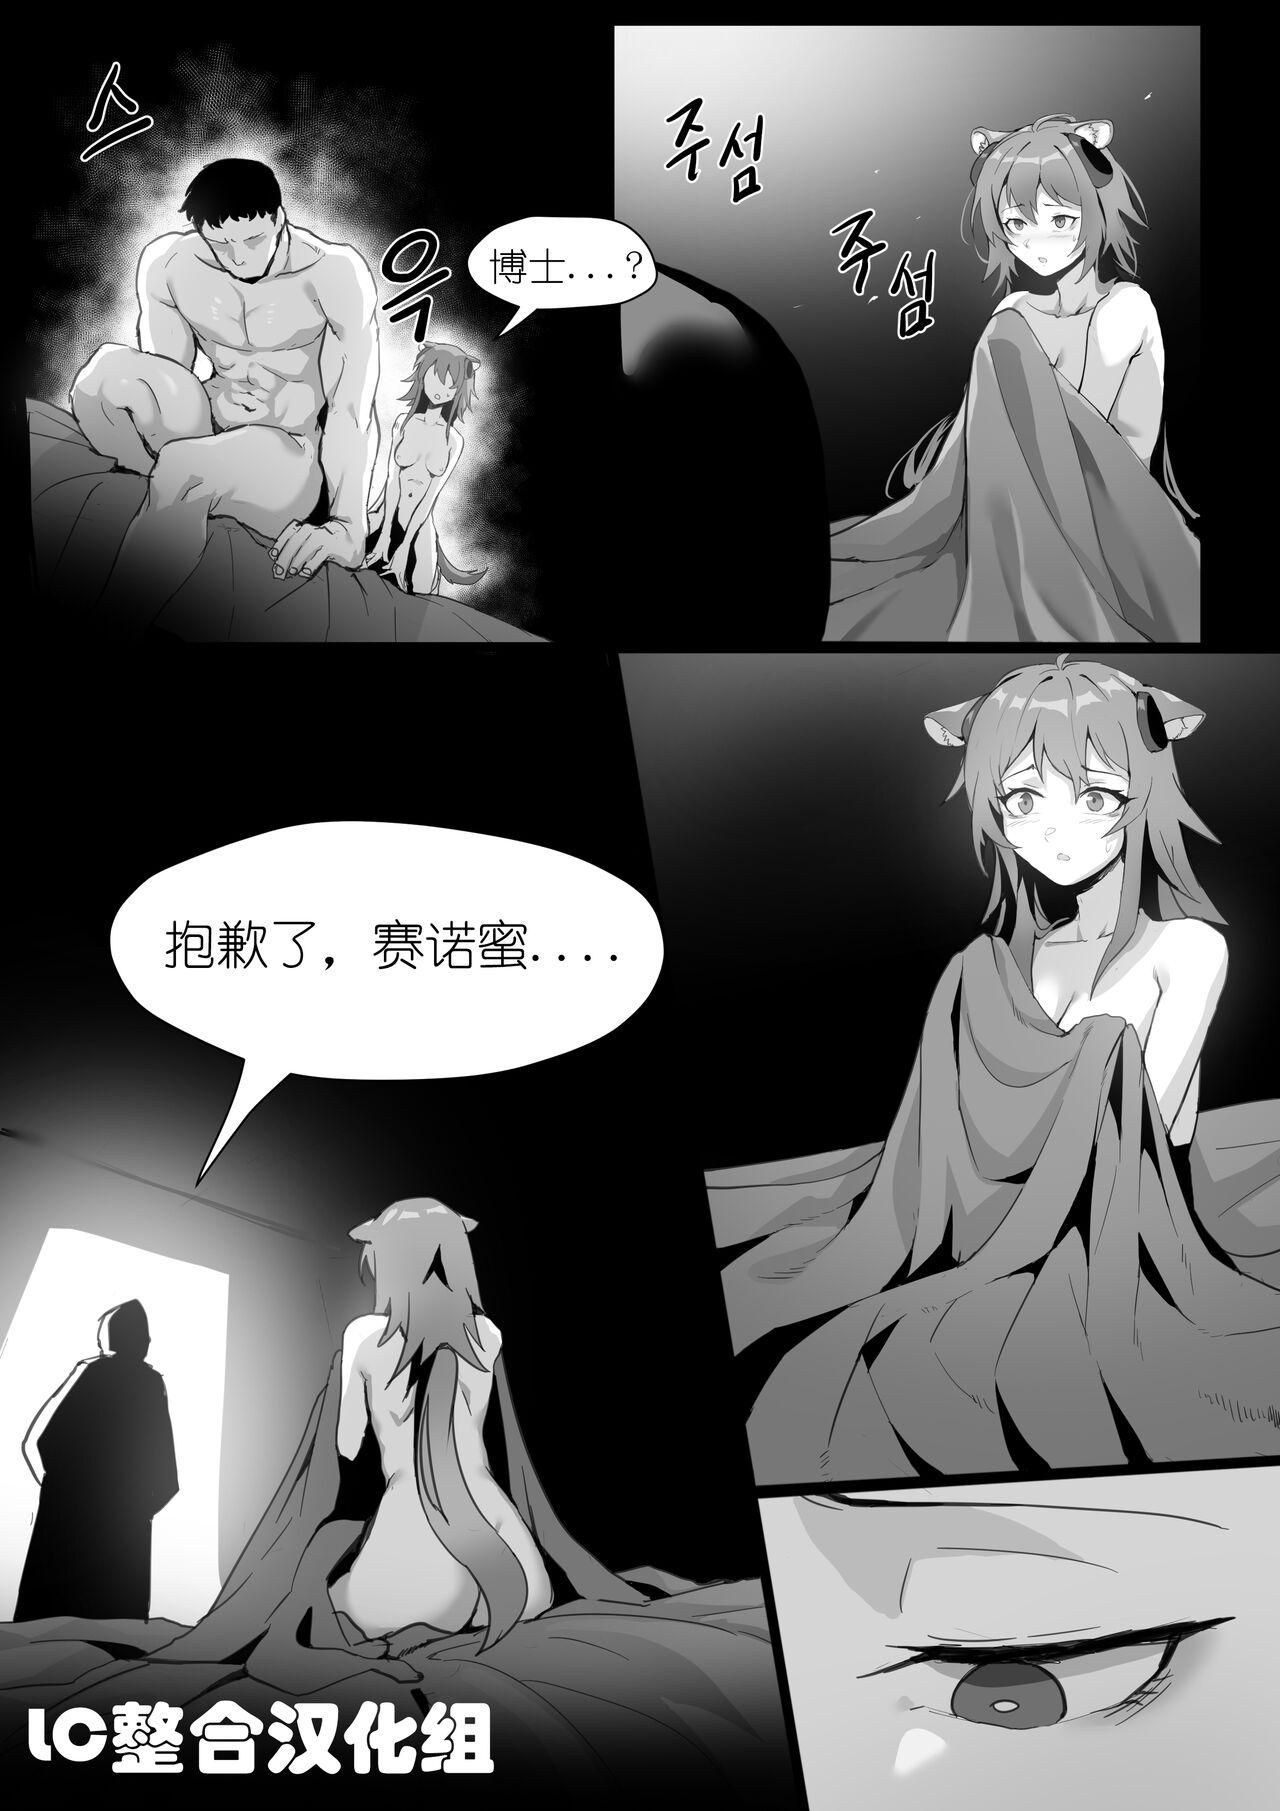 Pounded 欲望方舟记录3 - Arknights Lesbiansex - Page 5